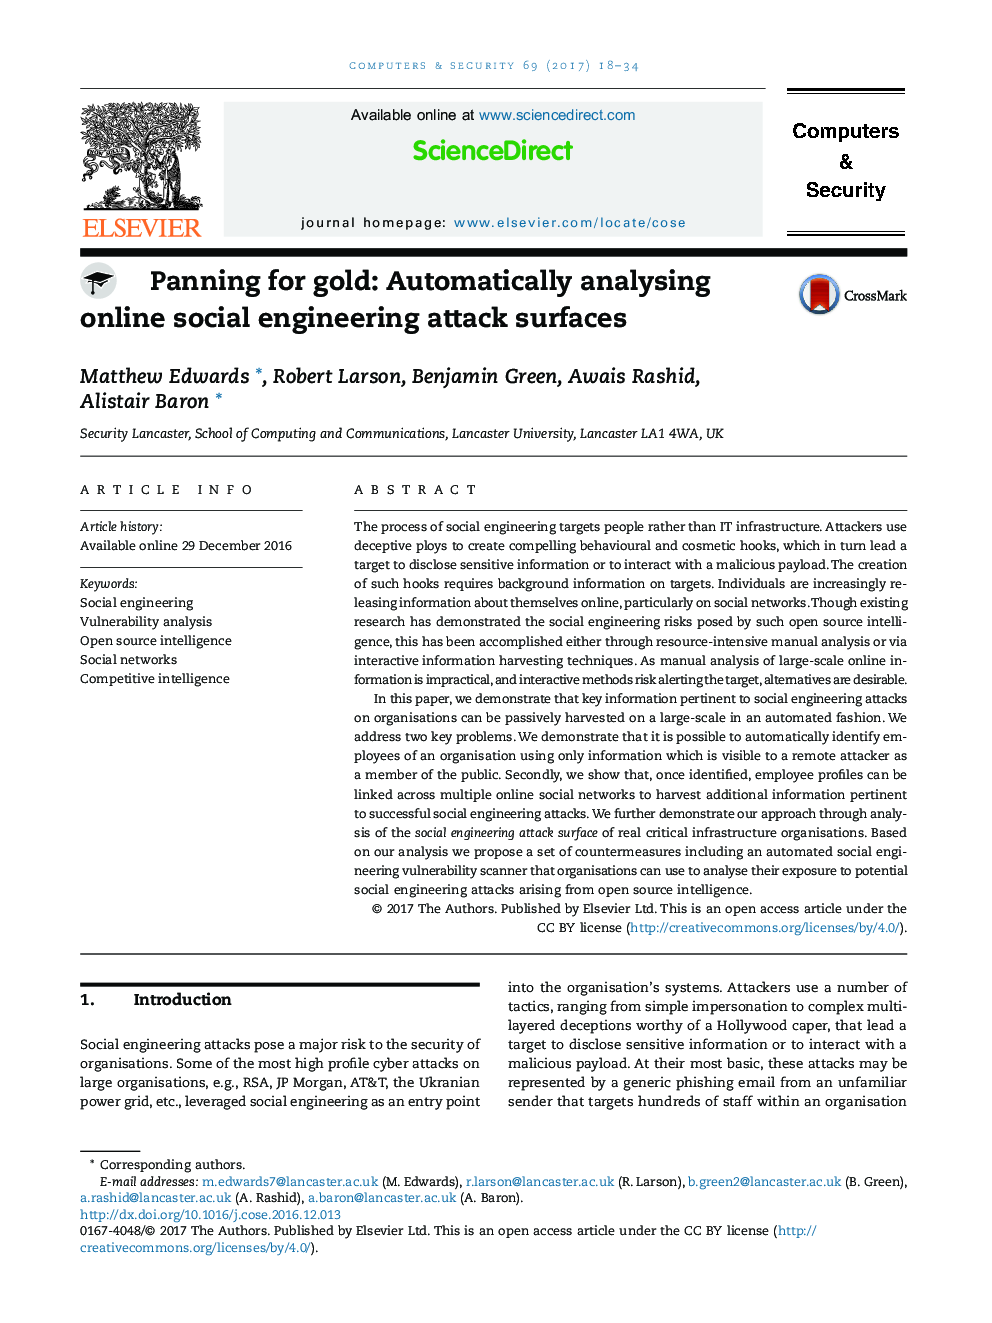 Panning for gold: Automatically analysing online social engineering attack surfaces